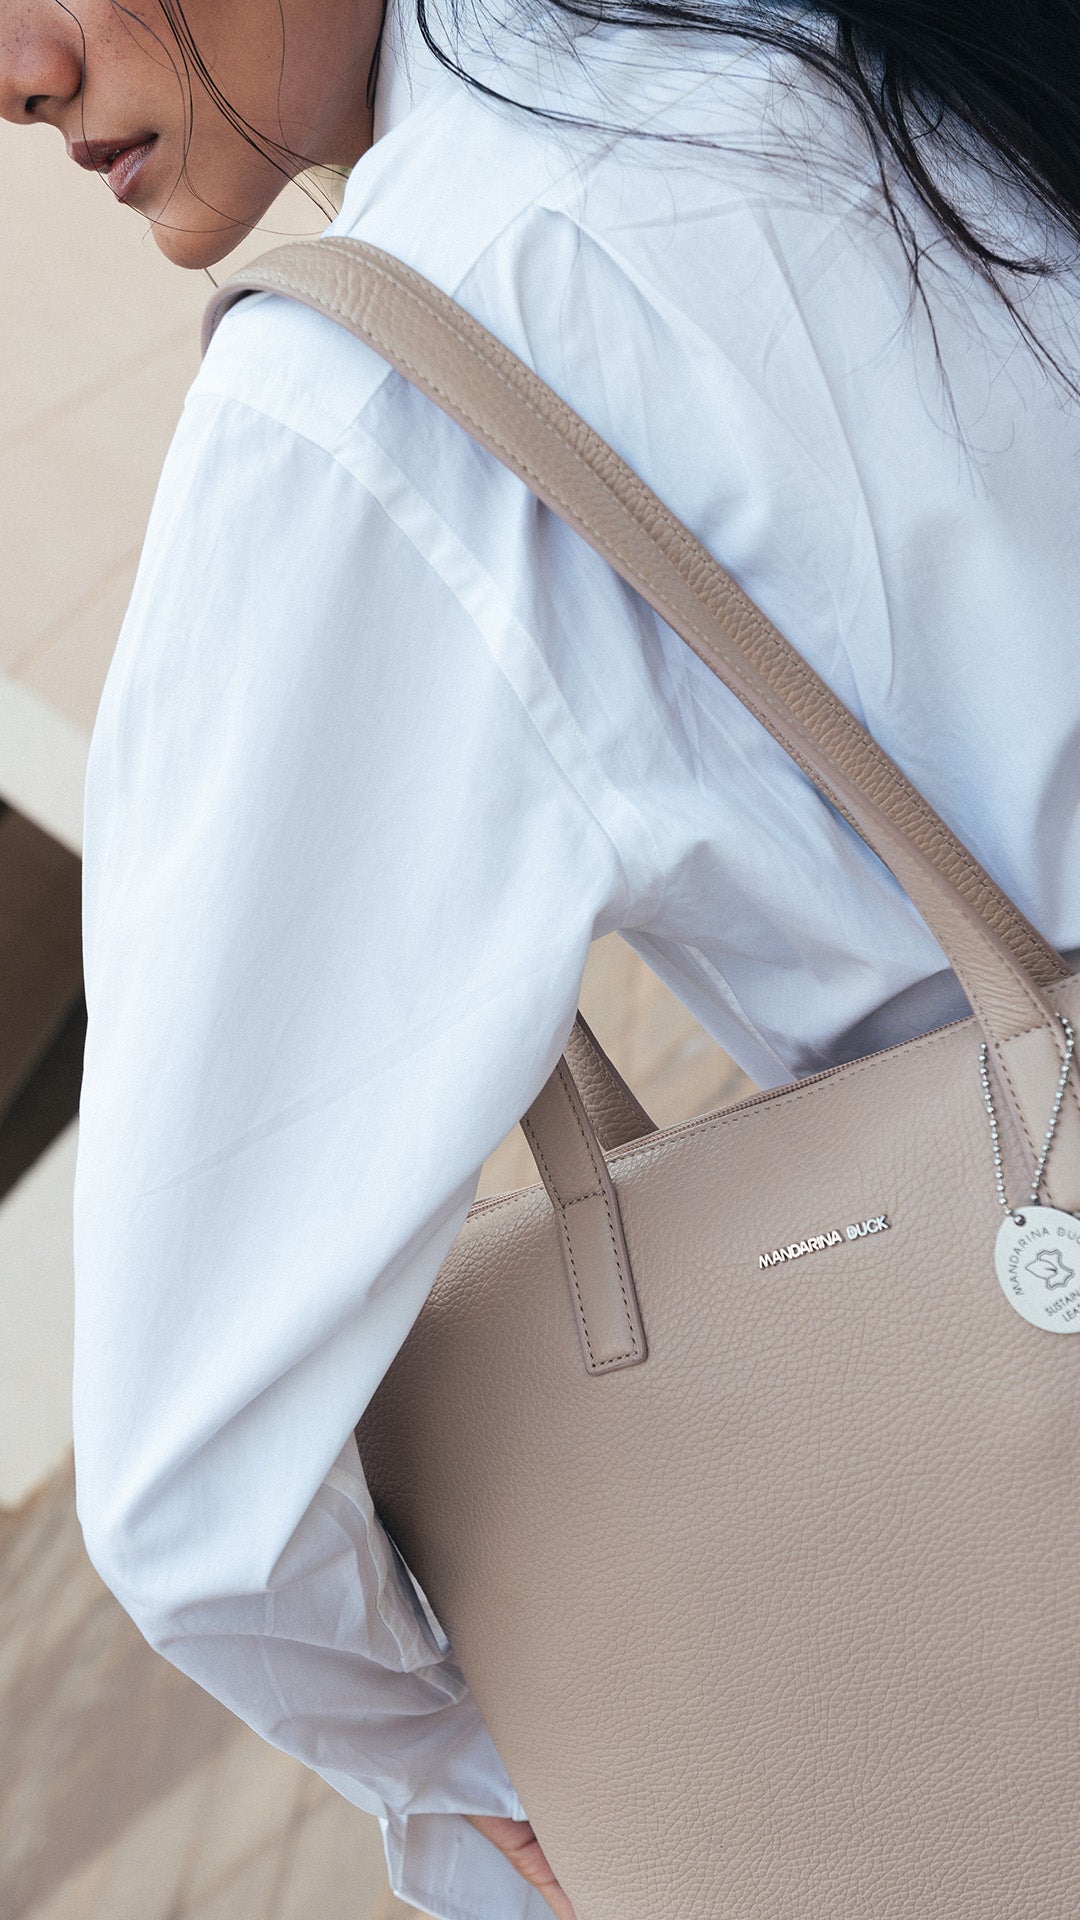 30 Most Popular Handbag Brands You’ll Want to Carry All Day Long |  thredUP Blog